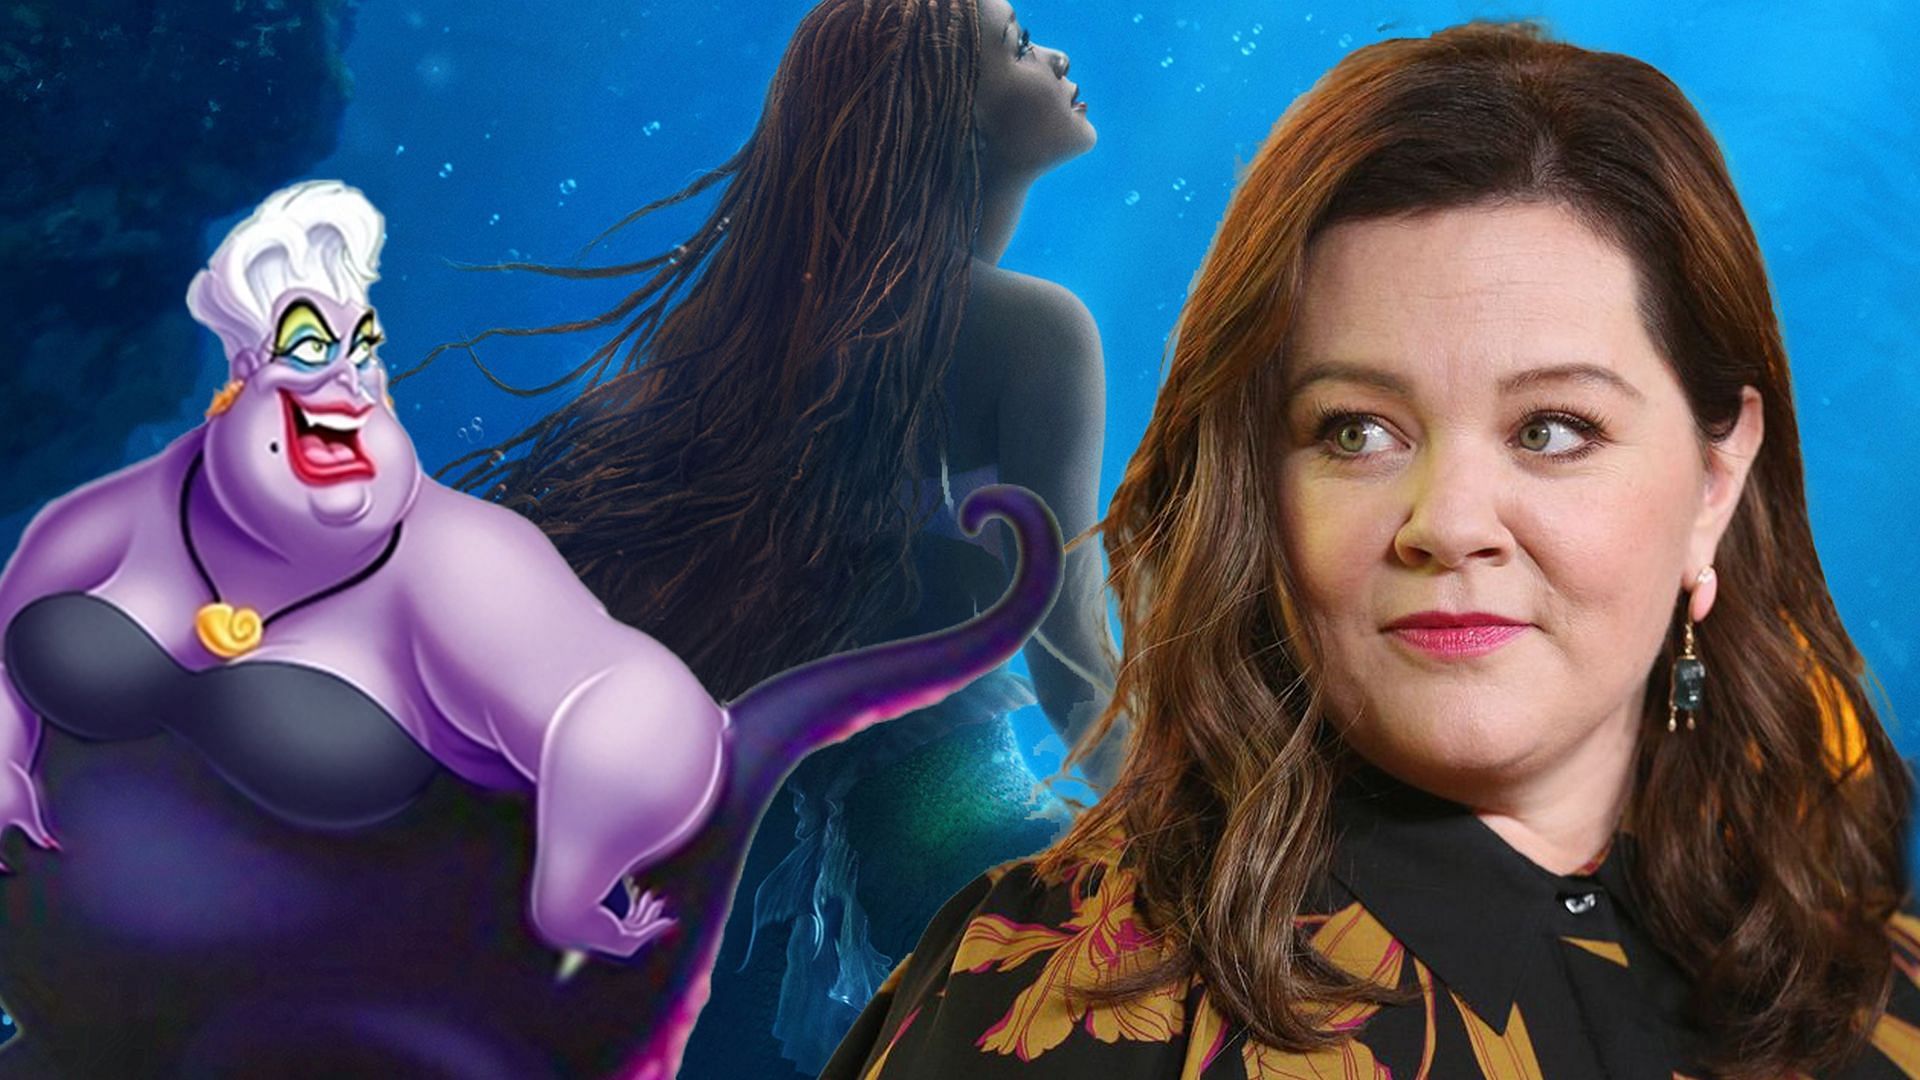 Who plays Ursula in the new Little Mermaid? Cast explored